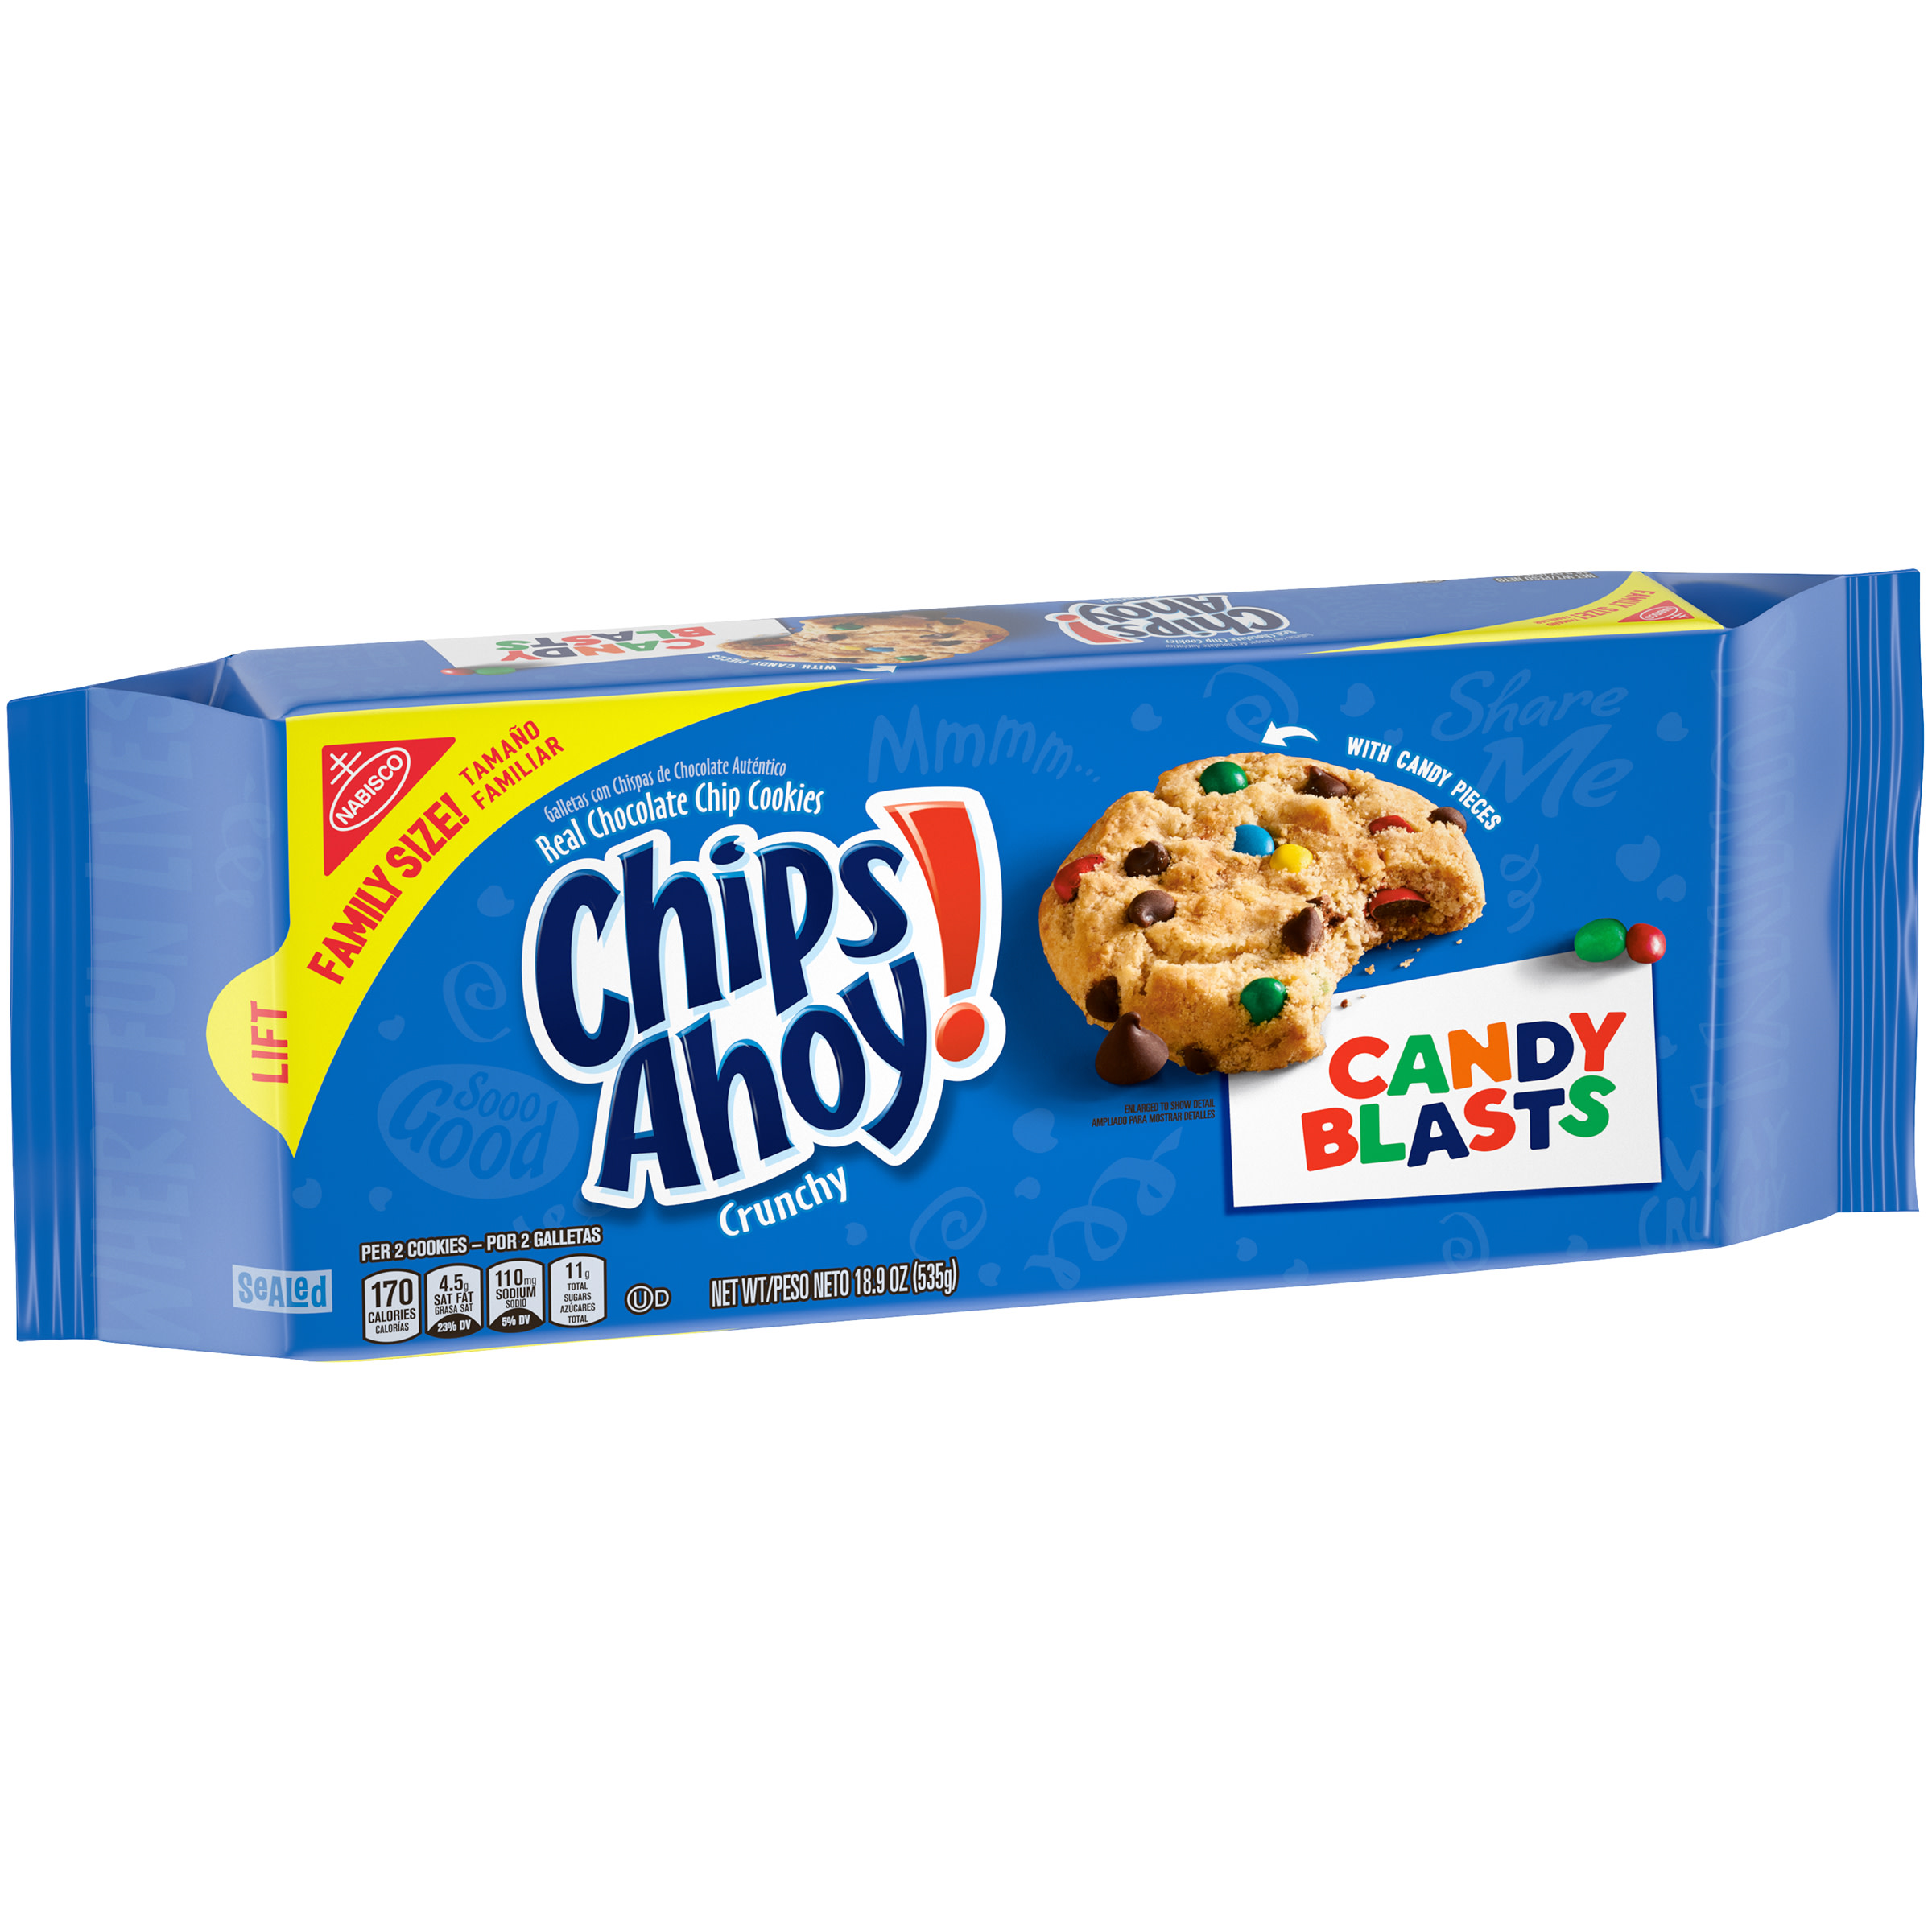 CHIPS AHOY! Candy Blast Family Size Cookies, 18.9 oz - image 3 of 13